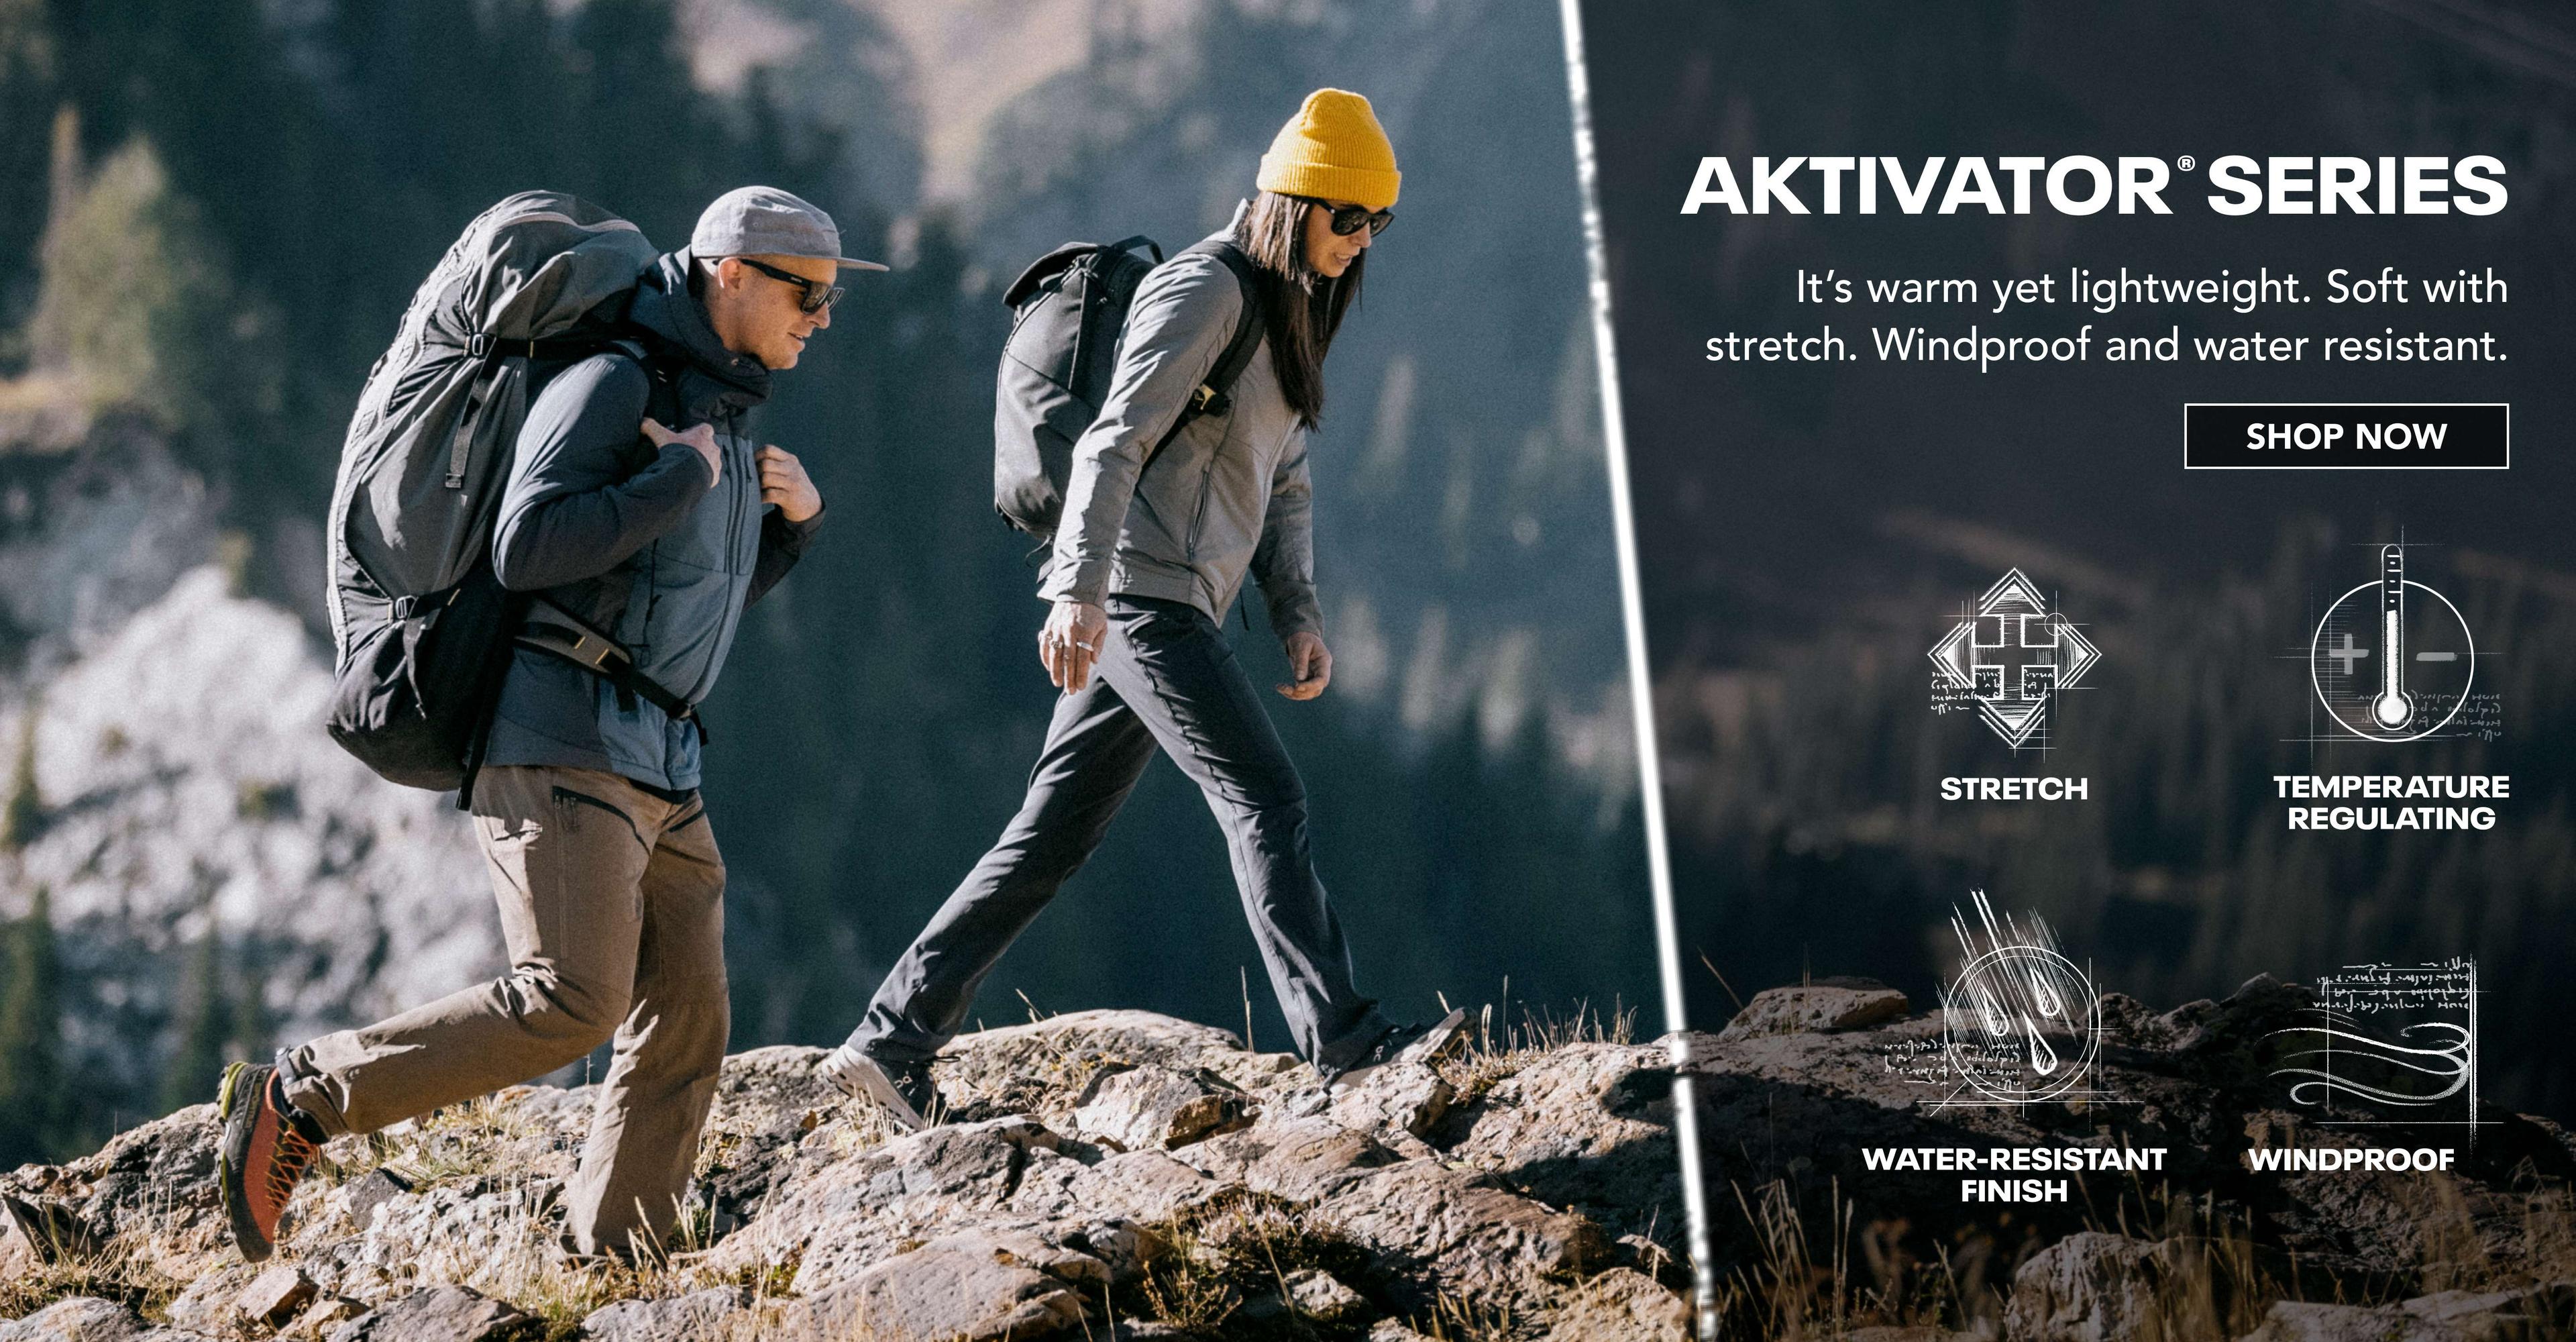 Man and woman wearing Aktivator jackets while on a hike.